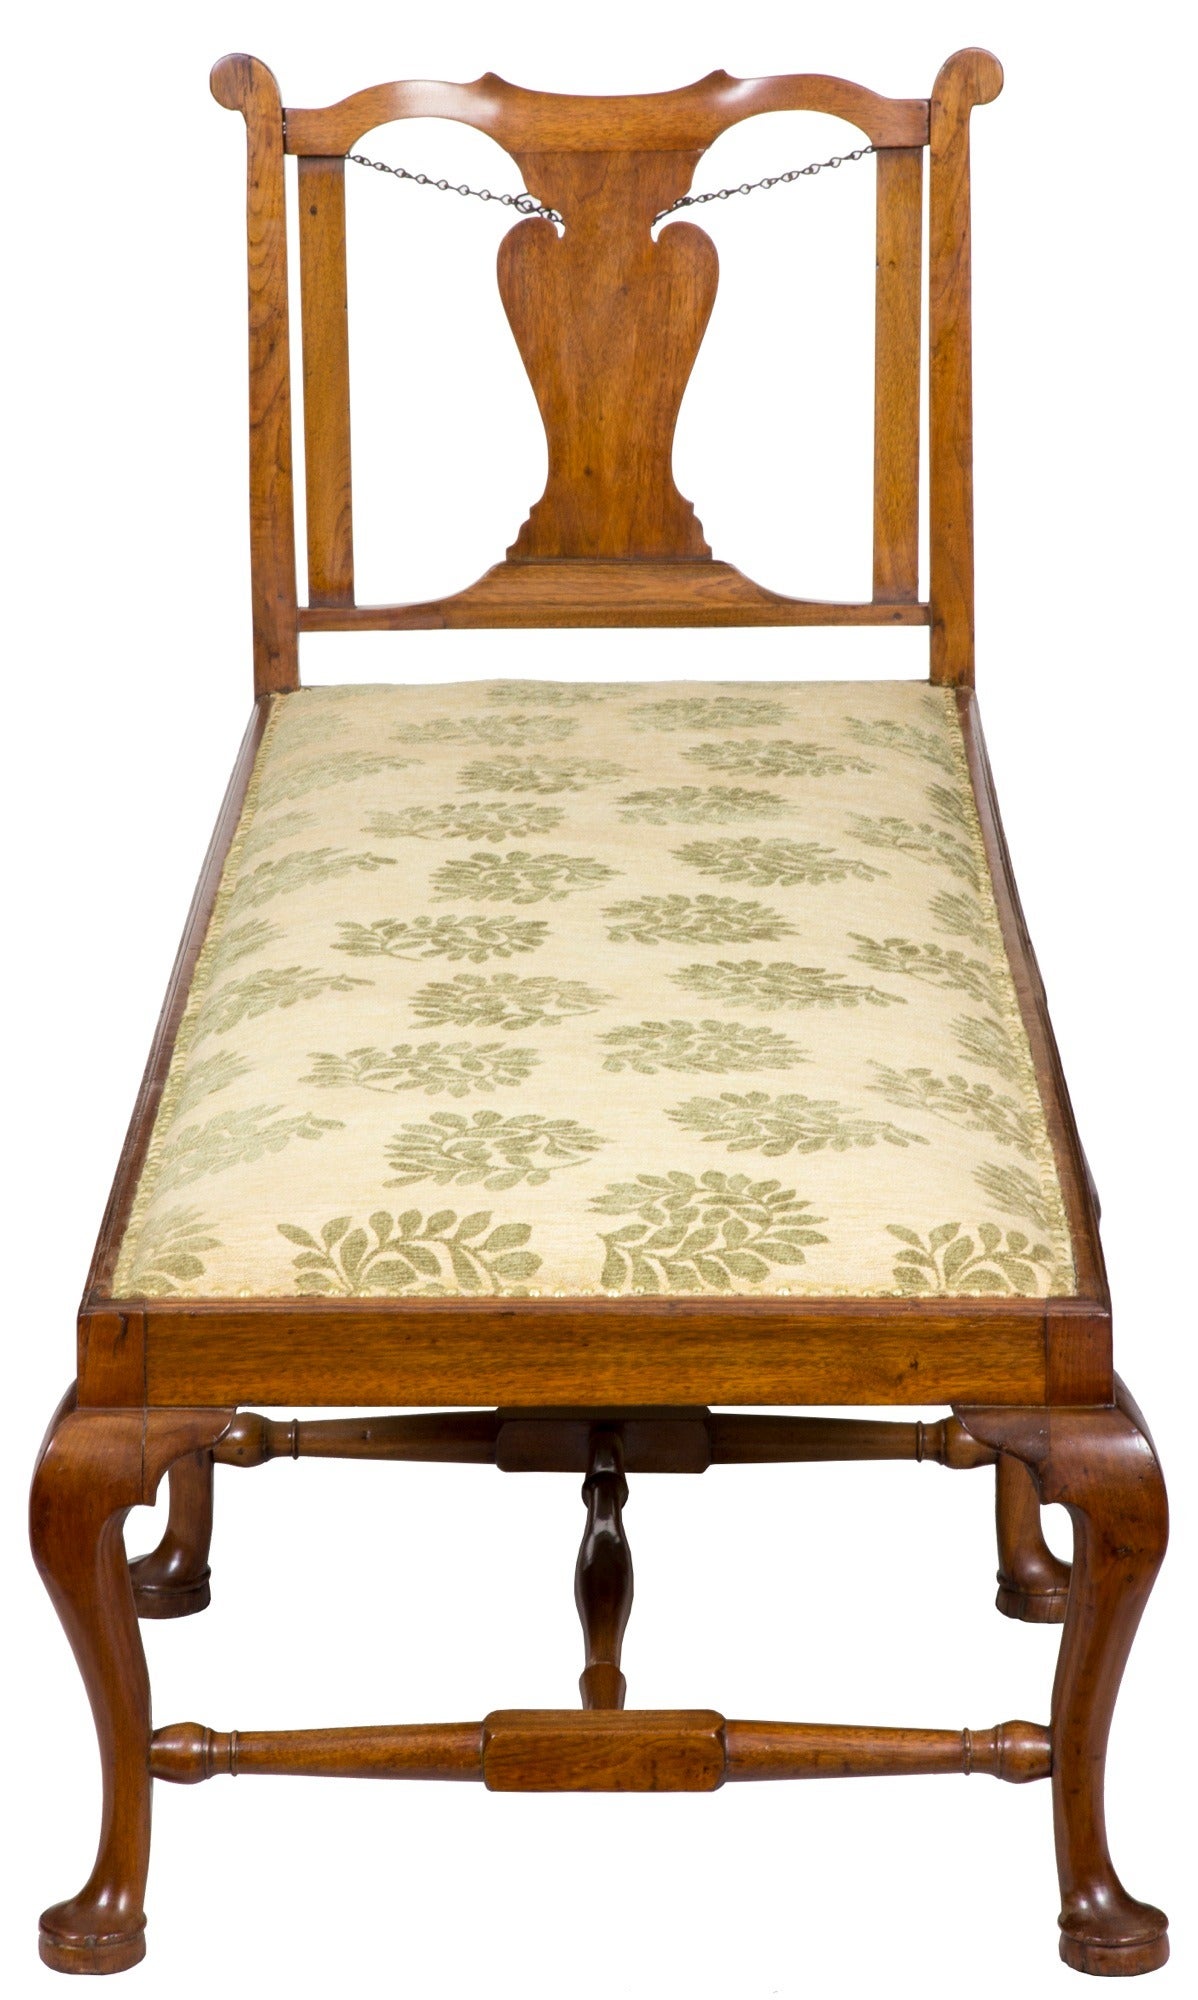 Unlike many daybeds that are caned this daybed was originally webbed like the cushion of a couch. We have rewebbed it in its entirety, and covered it in a historically correct fabric. (See attached, where the cross bracing is similar to the a sofa.)